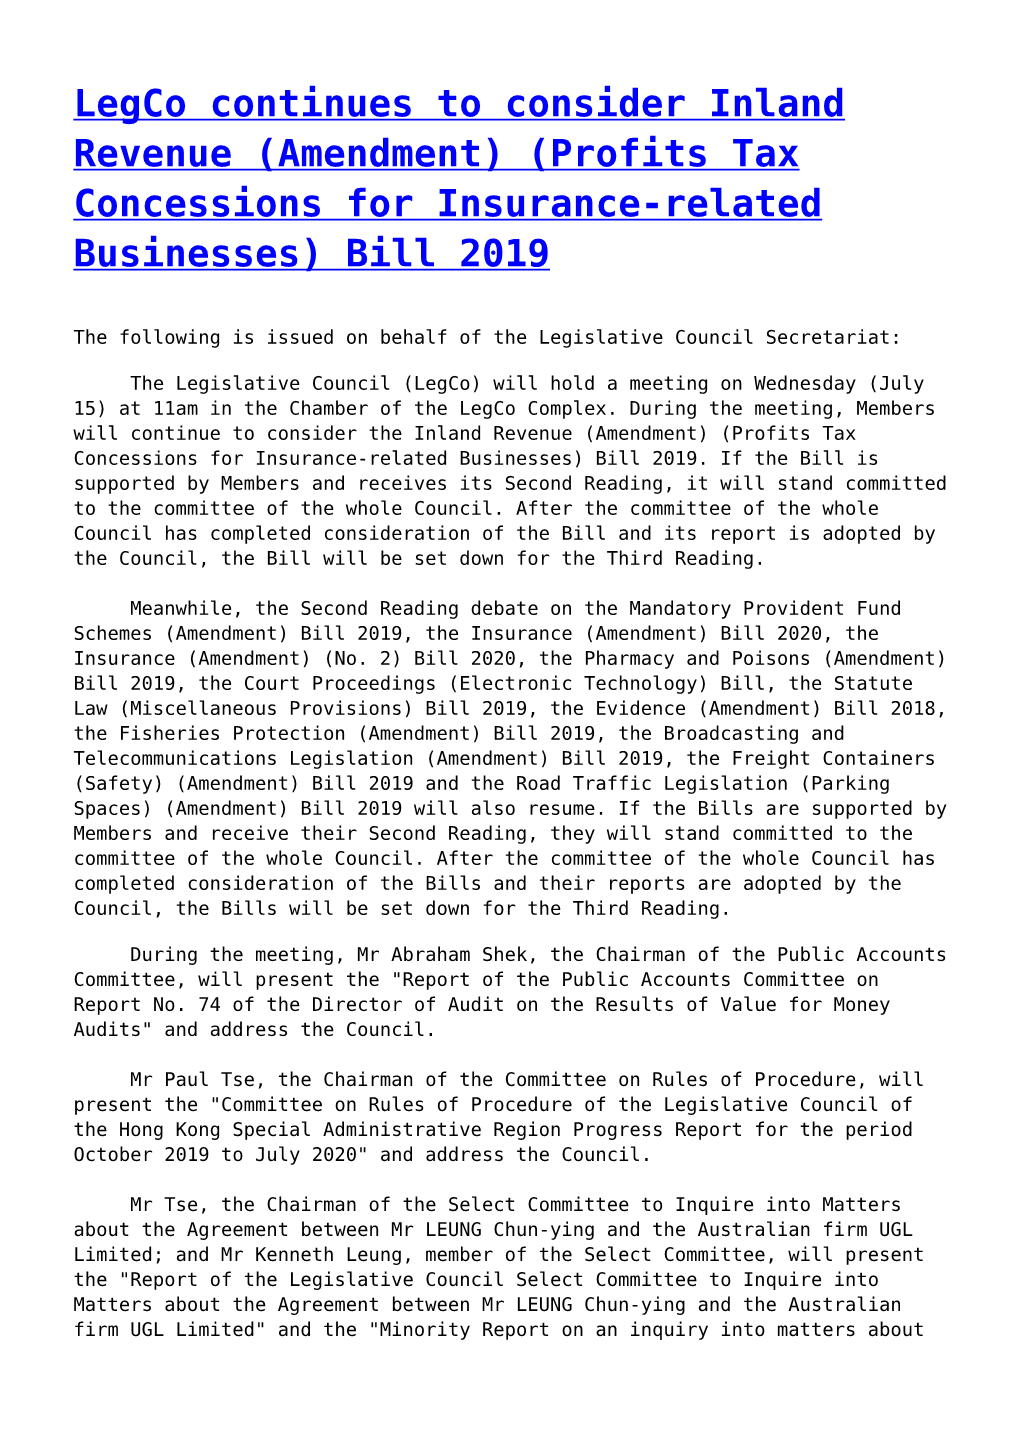 Legco Continues to Consider Inland Revenue (Amendment) (Profits Tax Concessions for Insurance-Related Businesses) Bill 2019